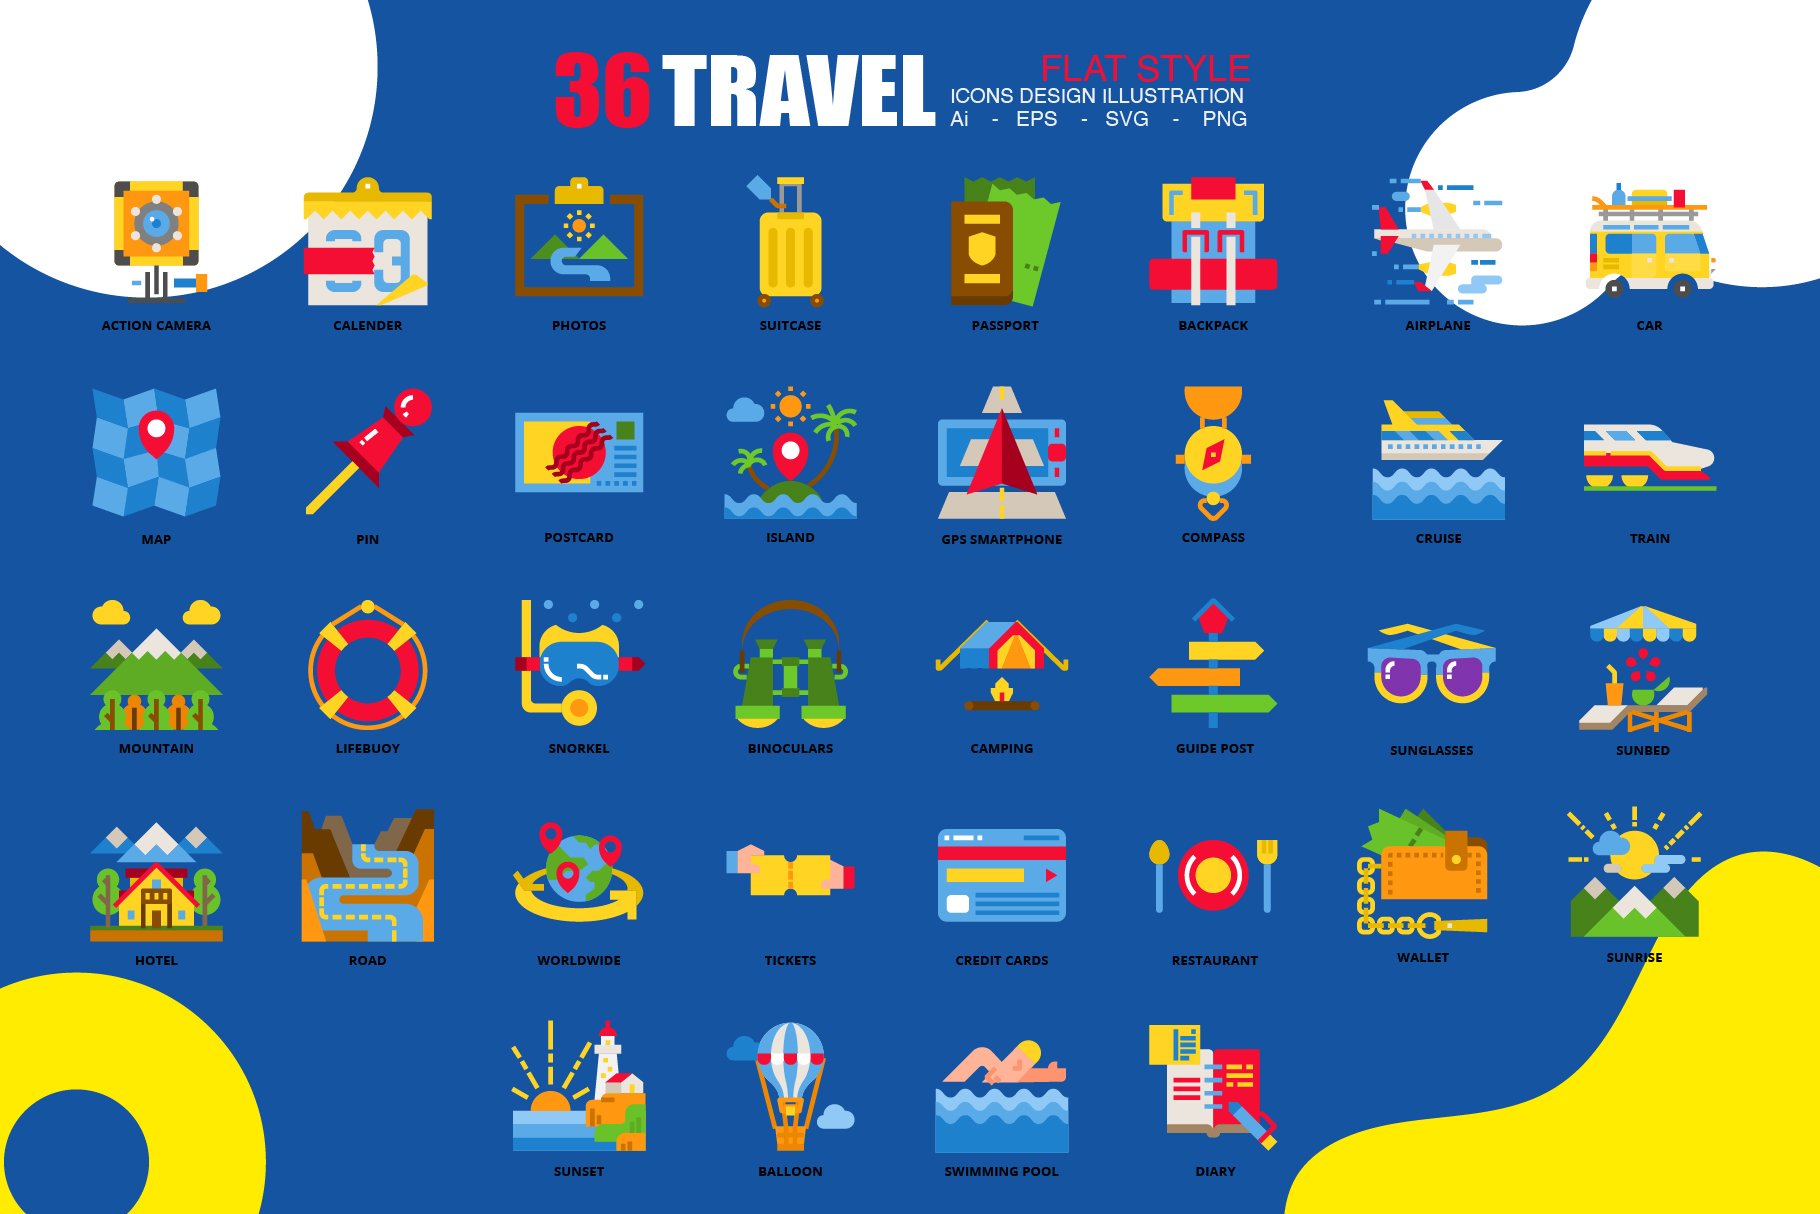 36 Travel icons set x 3 style preview image.